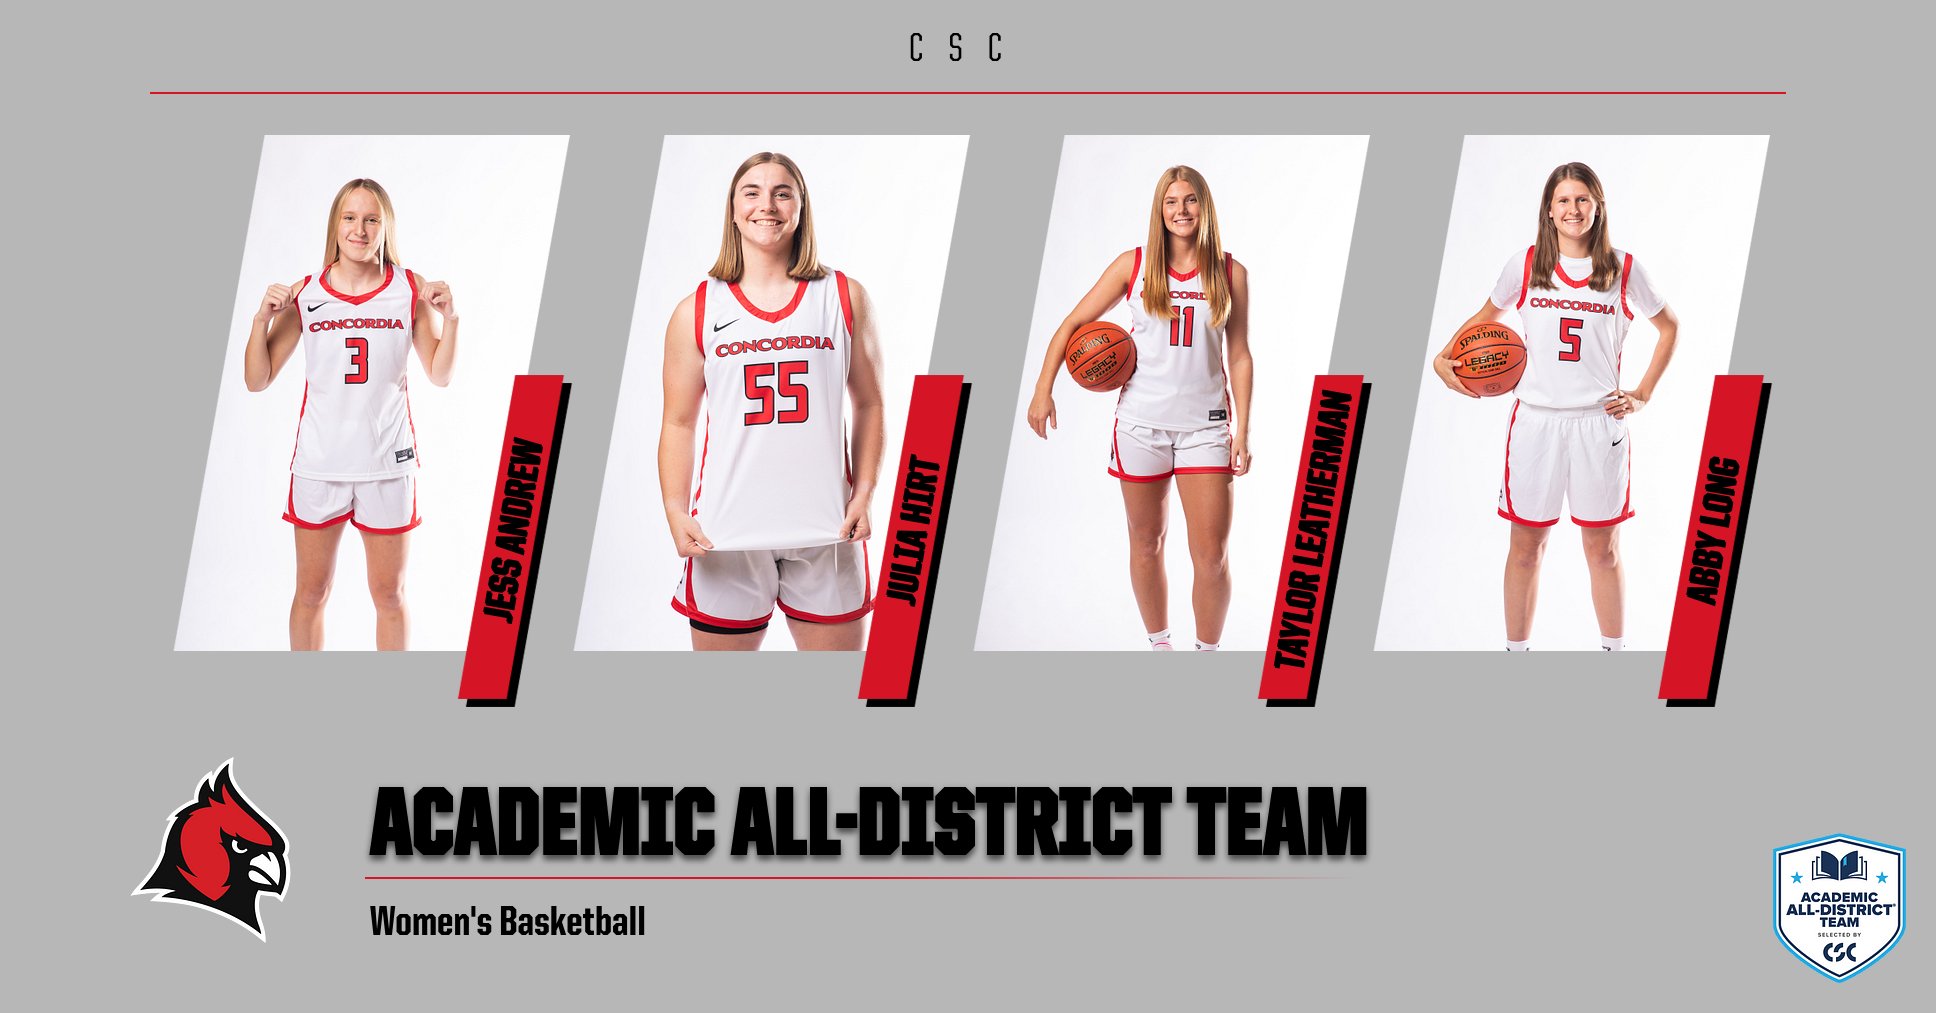 4 Cardinals named to CSC Academic All-District team